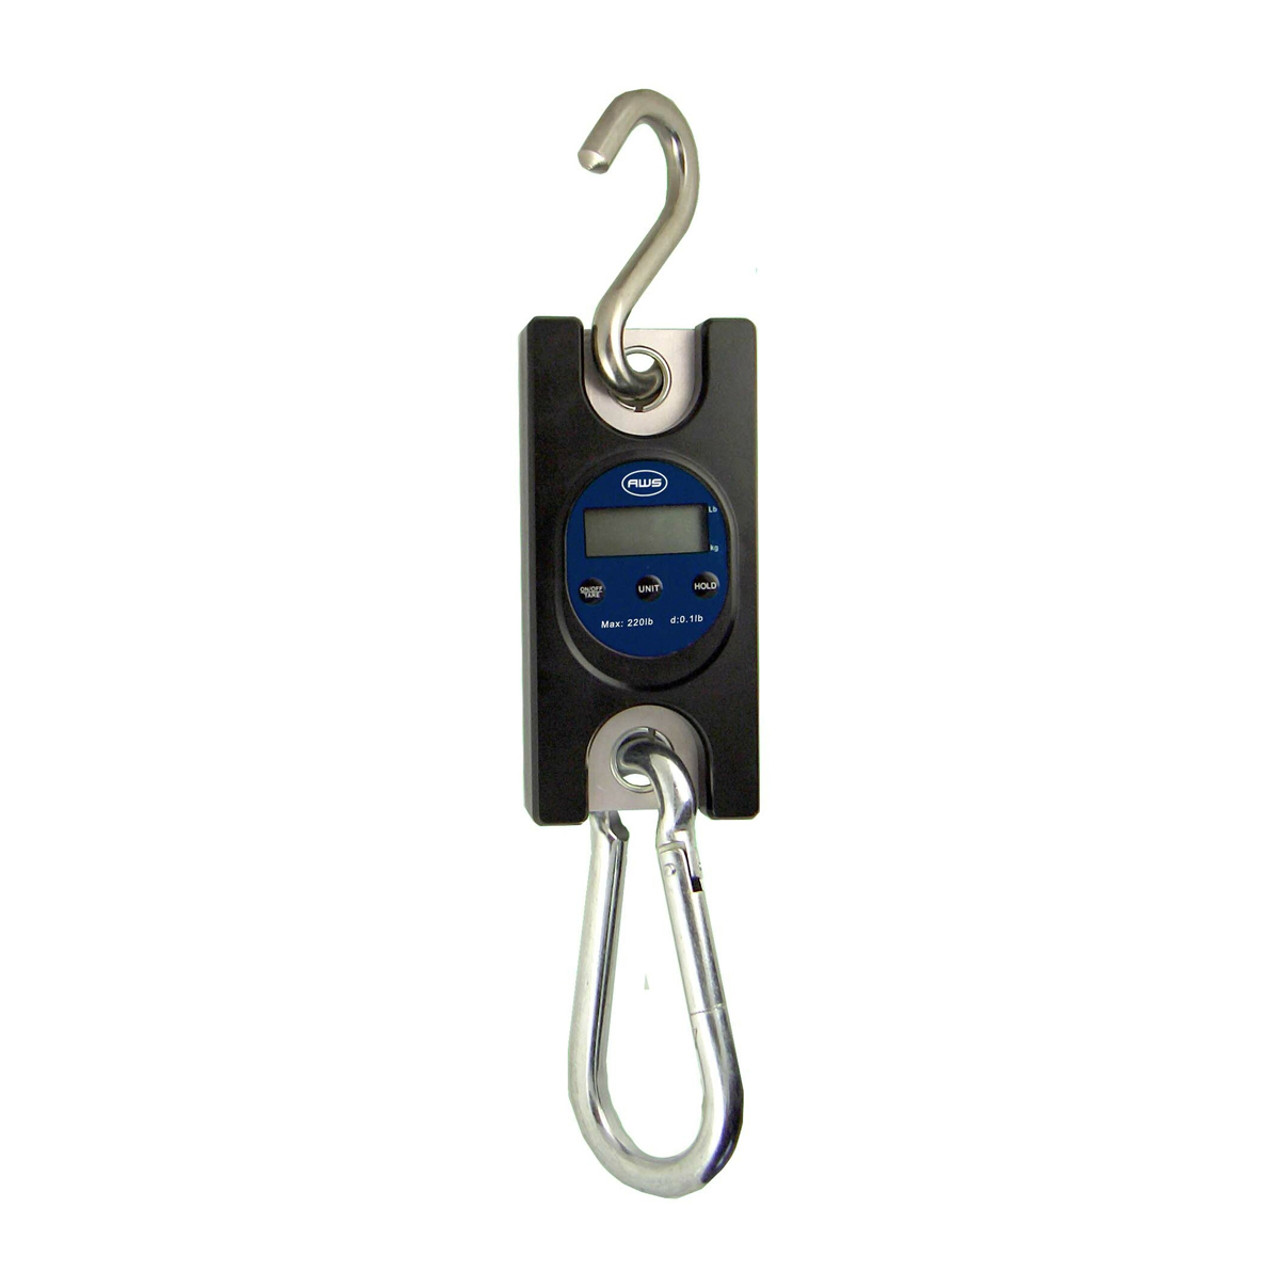 AMW-TL330 DIGITAL HANGING SCALE, 330LBS X 0.02LBS - American Weigh Scales